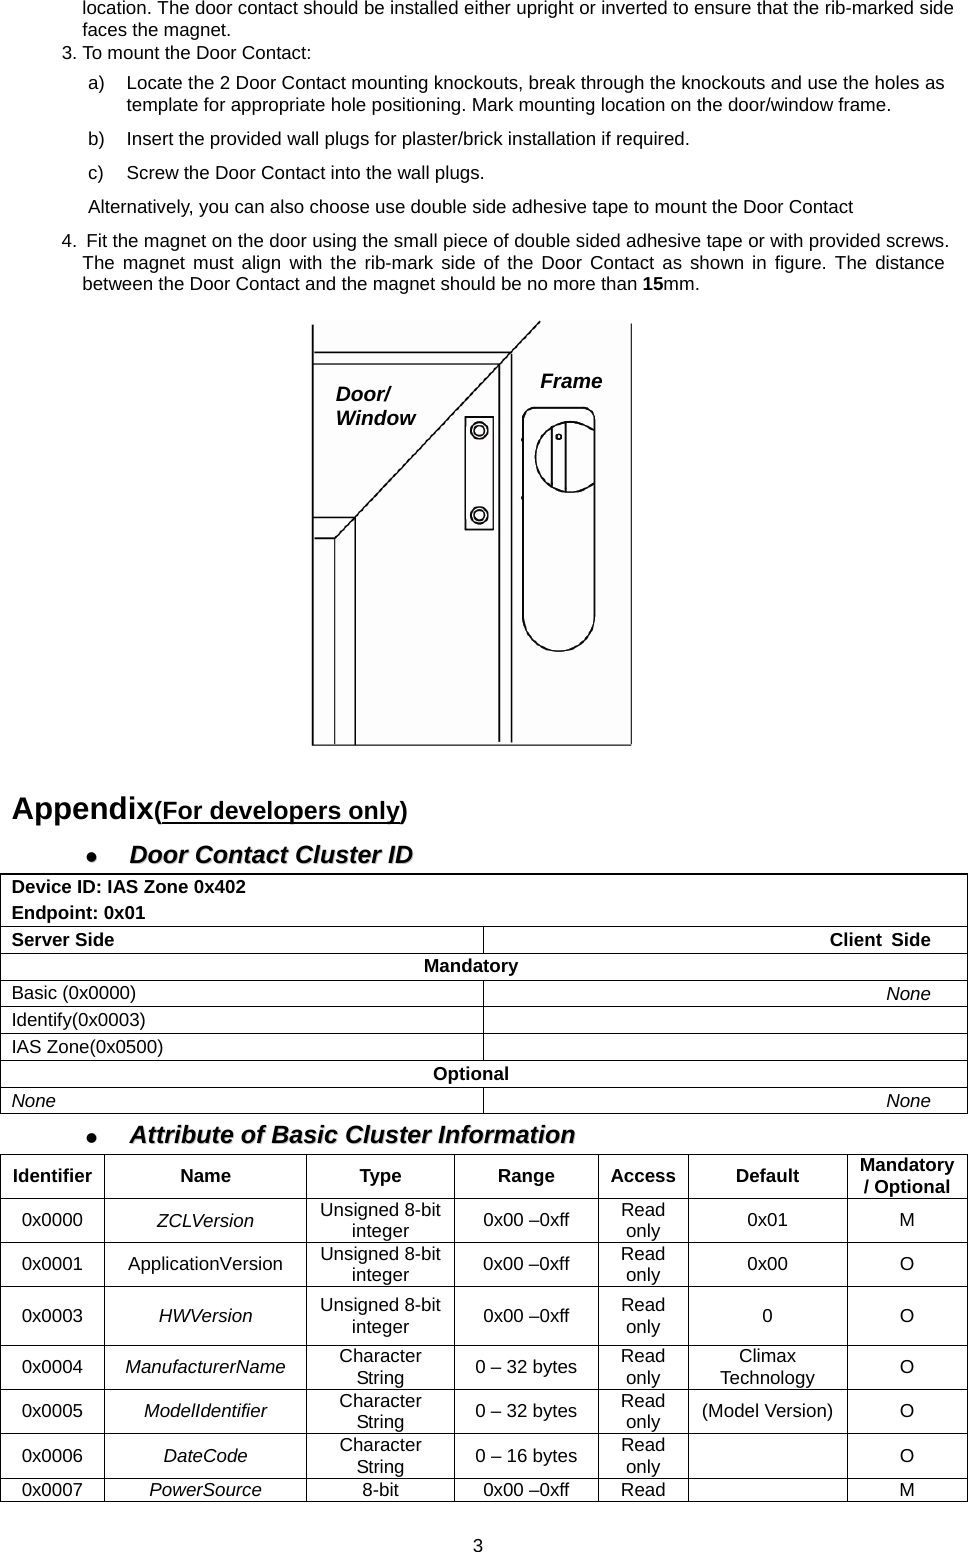 location. The door contact should be installed either upright or inverted to ensure that the rib-marked side faces the magnet. 3. To mount the Door Contact: a)  Locate the 2 Door Contact mounting knockouts, break through the knockouts and use the holes as template for appropriate hole positioning. Mark mounting location on the door/window frame. b)  Insert the provided wall plugs for plaster/brick installation if required. c)  Screw the Door Contact into the wall plugs. Alternatively, you can also choose use double side adhesive tape to mount the Door Contact 4.  Fit the magnet on the door using the small piece of double sided adhesive tape or with provided screws. The magnet must align with the rib-mark side of the Door Contact as shown in figure. The distance between the Door Contact and the magnet should be no more than 15mm.            Appendix(For developers only)   Door  Contact  Cluster  ID  Door Contact Cluster IDDevice ID: IAS Zone 0x402 Endpoint: 0x01 Server Side  Client Side Mandatory Basic (0x0000)  None Identify(0x0003)  IAS Zone(0x0500)   Optional None  None   Attribute  of  Basic  Cluster  Information  Attribute of Basic Cluster InformationIdentifier Name  Type  Range Access Default Mandatory / Optional0x0000  ZCLVersion  Unsigned 8-bit integer  0x00 –0xff  Read only  0x01 M 0x0001 ApplicationVersion Unsigned 8-bit integer  0x00 –0xff  Read only  0x00 O 0x0003  HWVersion  Unsigned 8-bit integer  0x00 –0xff  Read only  0 O 0x0004  ManufacturerName  Character String  0 – 32 bytes  Read only  Climax Technology  O 0x0005  ModelIdentifier  Character String  0 – 32 bytes  Read only  (Model Version)  O 0x0006  DateCode  Character String  0 – 16 bytes  Read only   O 0x0007  PowerSource  8-bit 0x00 –0xff Read    M FrameDoor/ Window  3